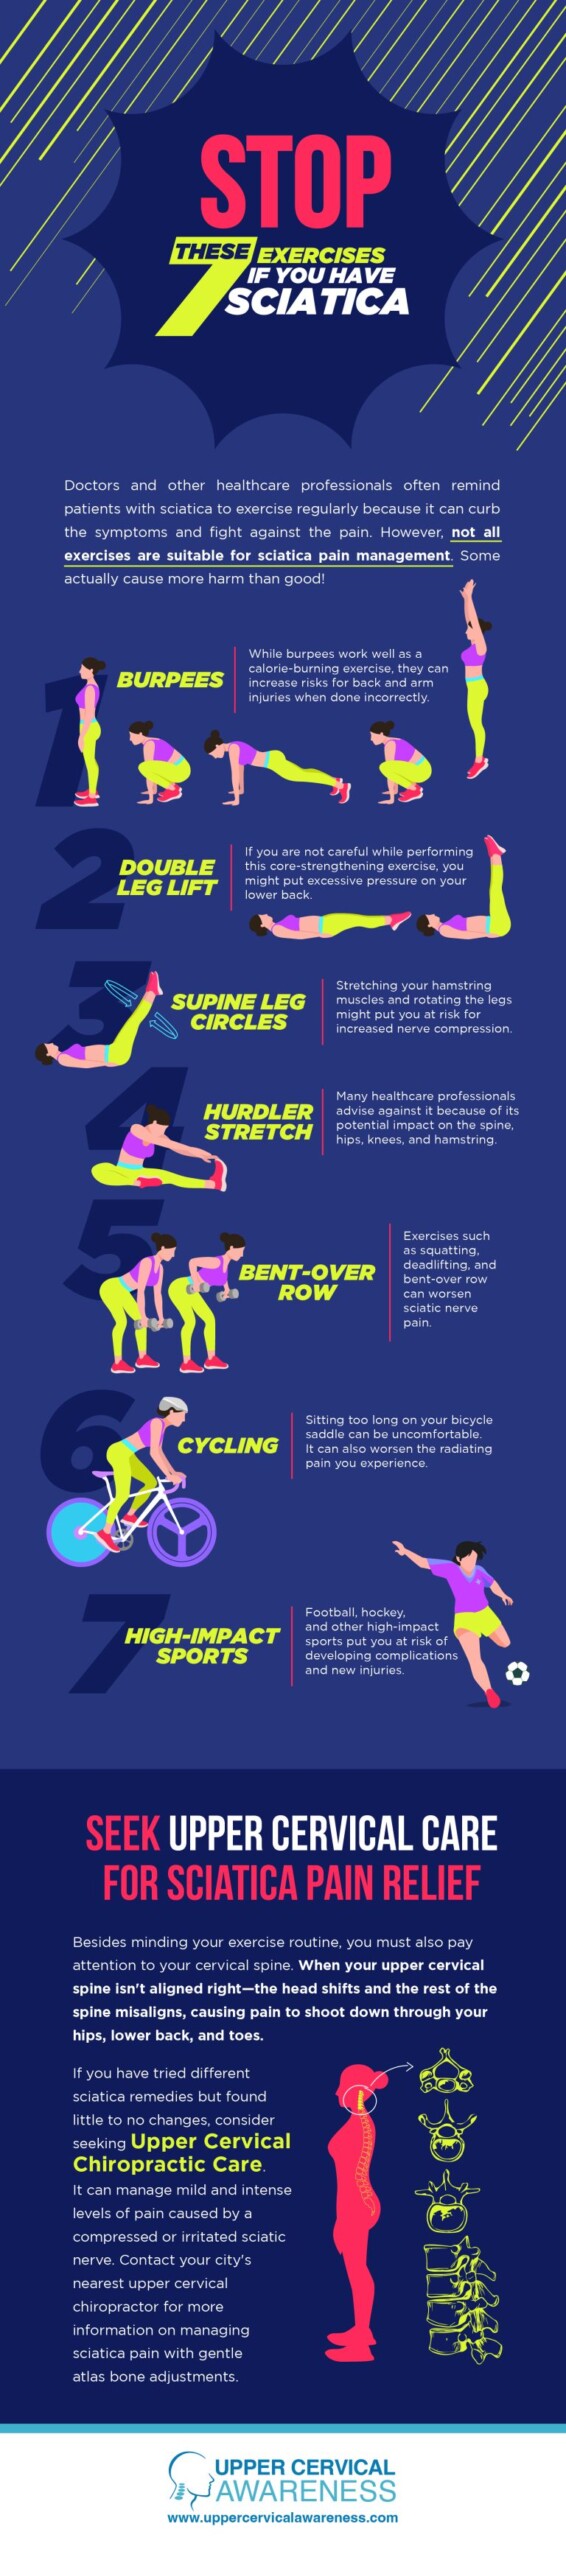 Spring Lake Park Chiropractor, back pain relief infographic